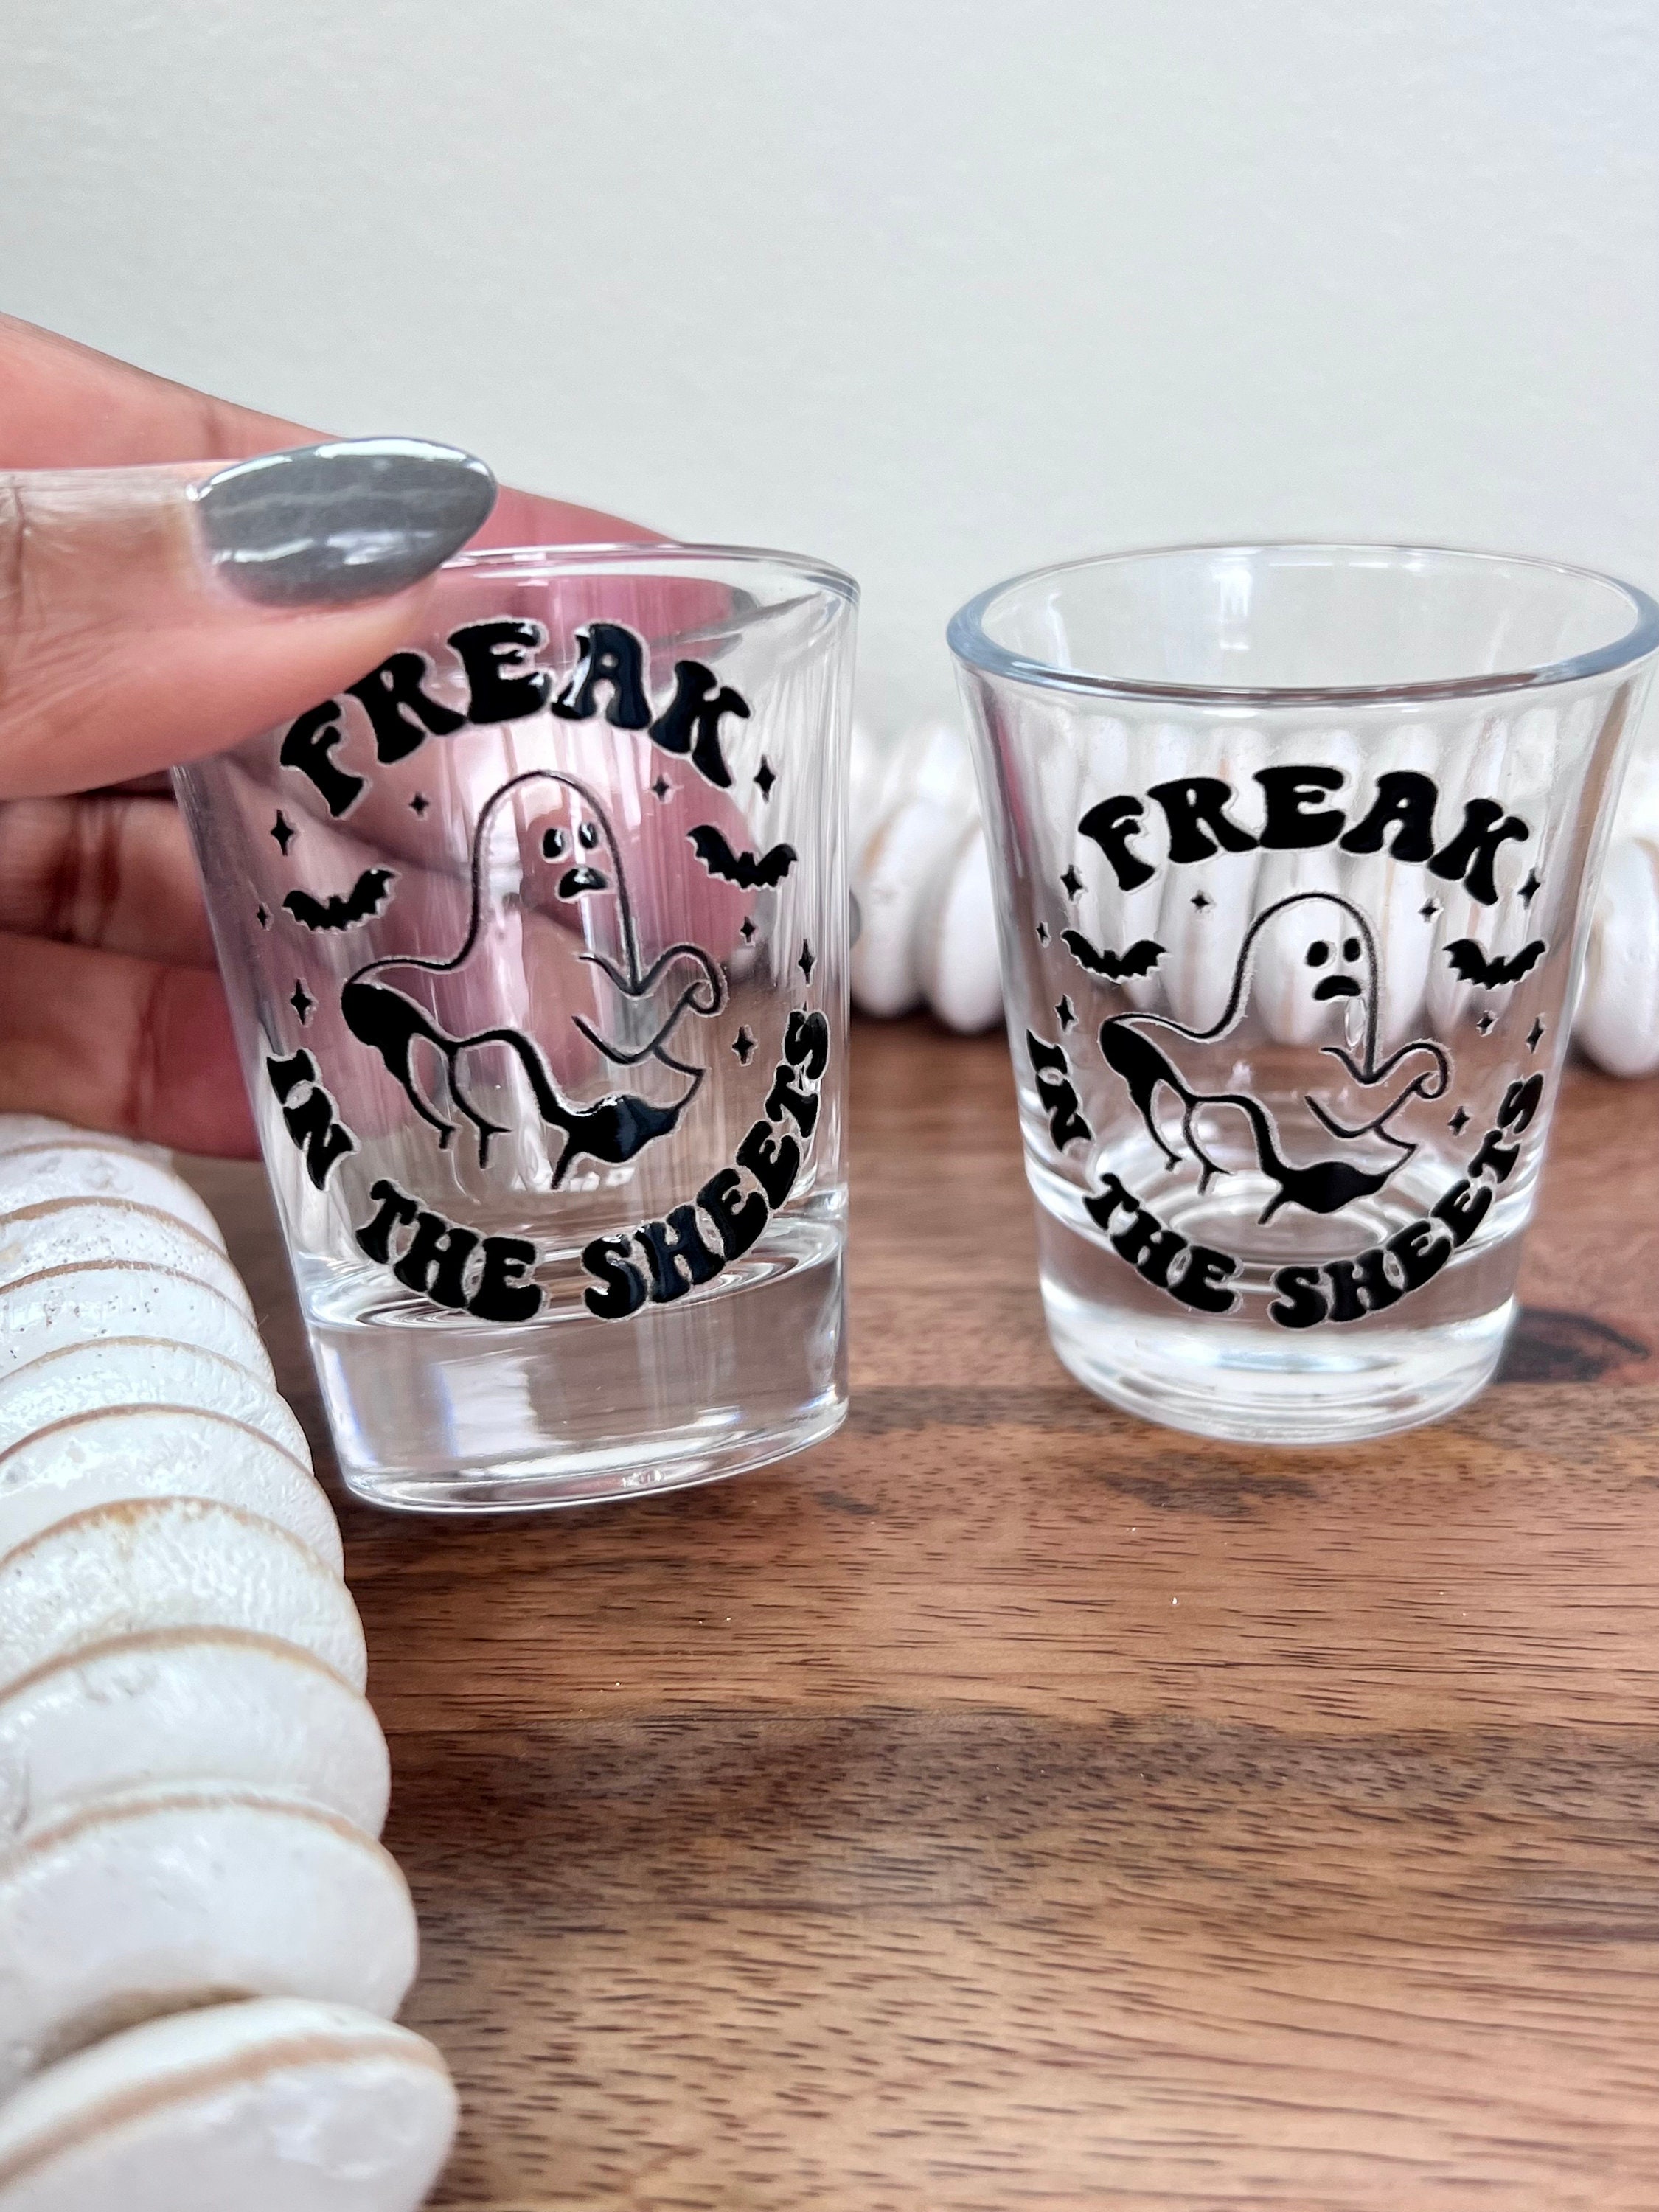 Funny Author Gifts, Dedicated Author Even From a Distance, Cool Shot Glass  For Men Women From Boss, …See more Funny Author Gifts, Dedicated Author